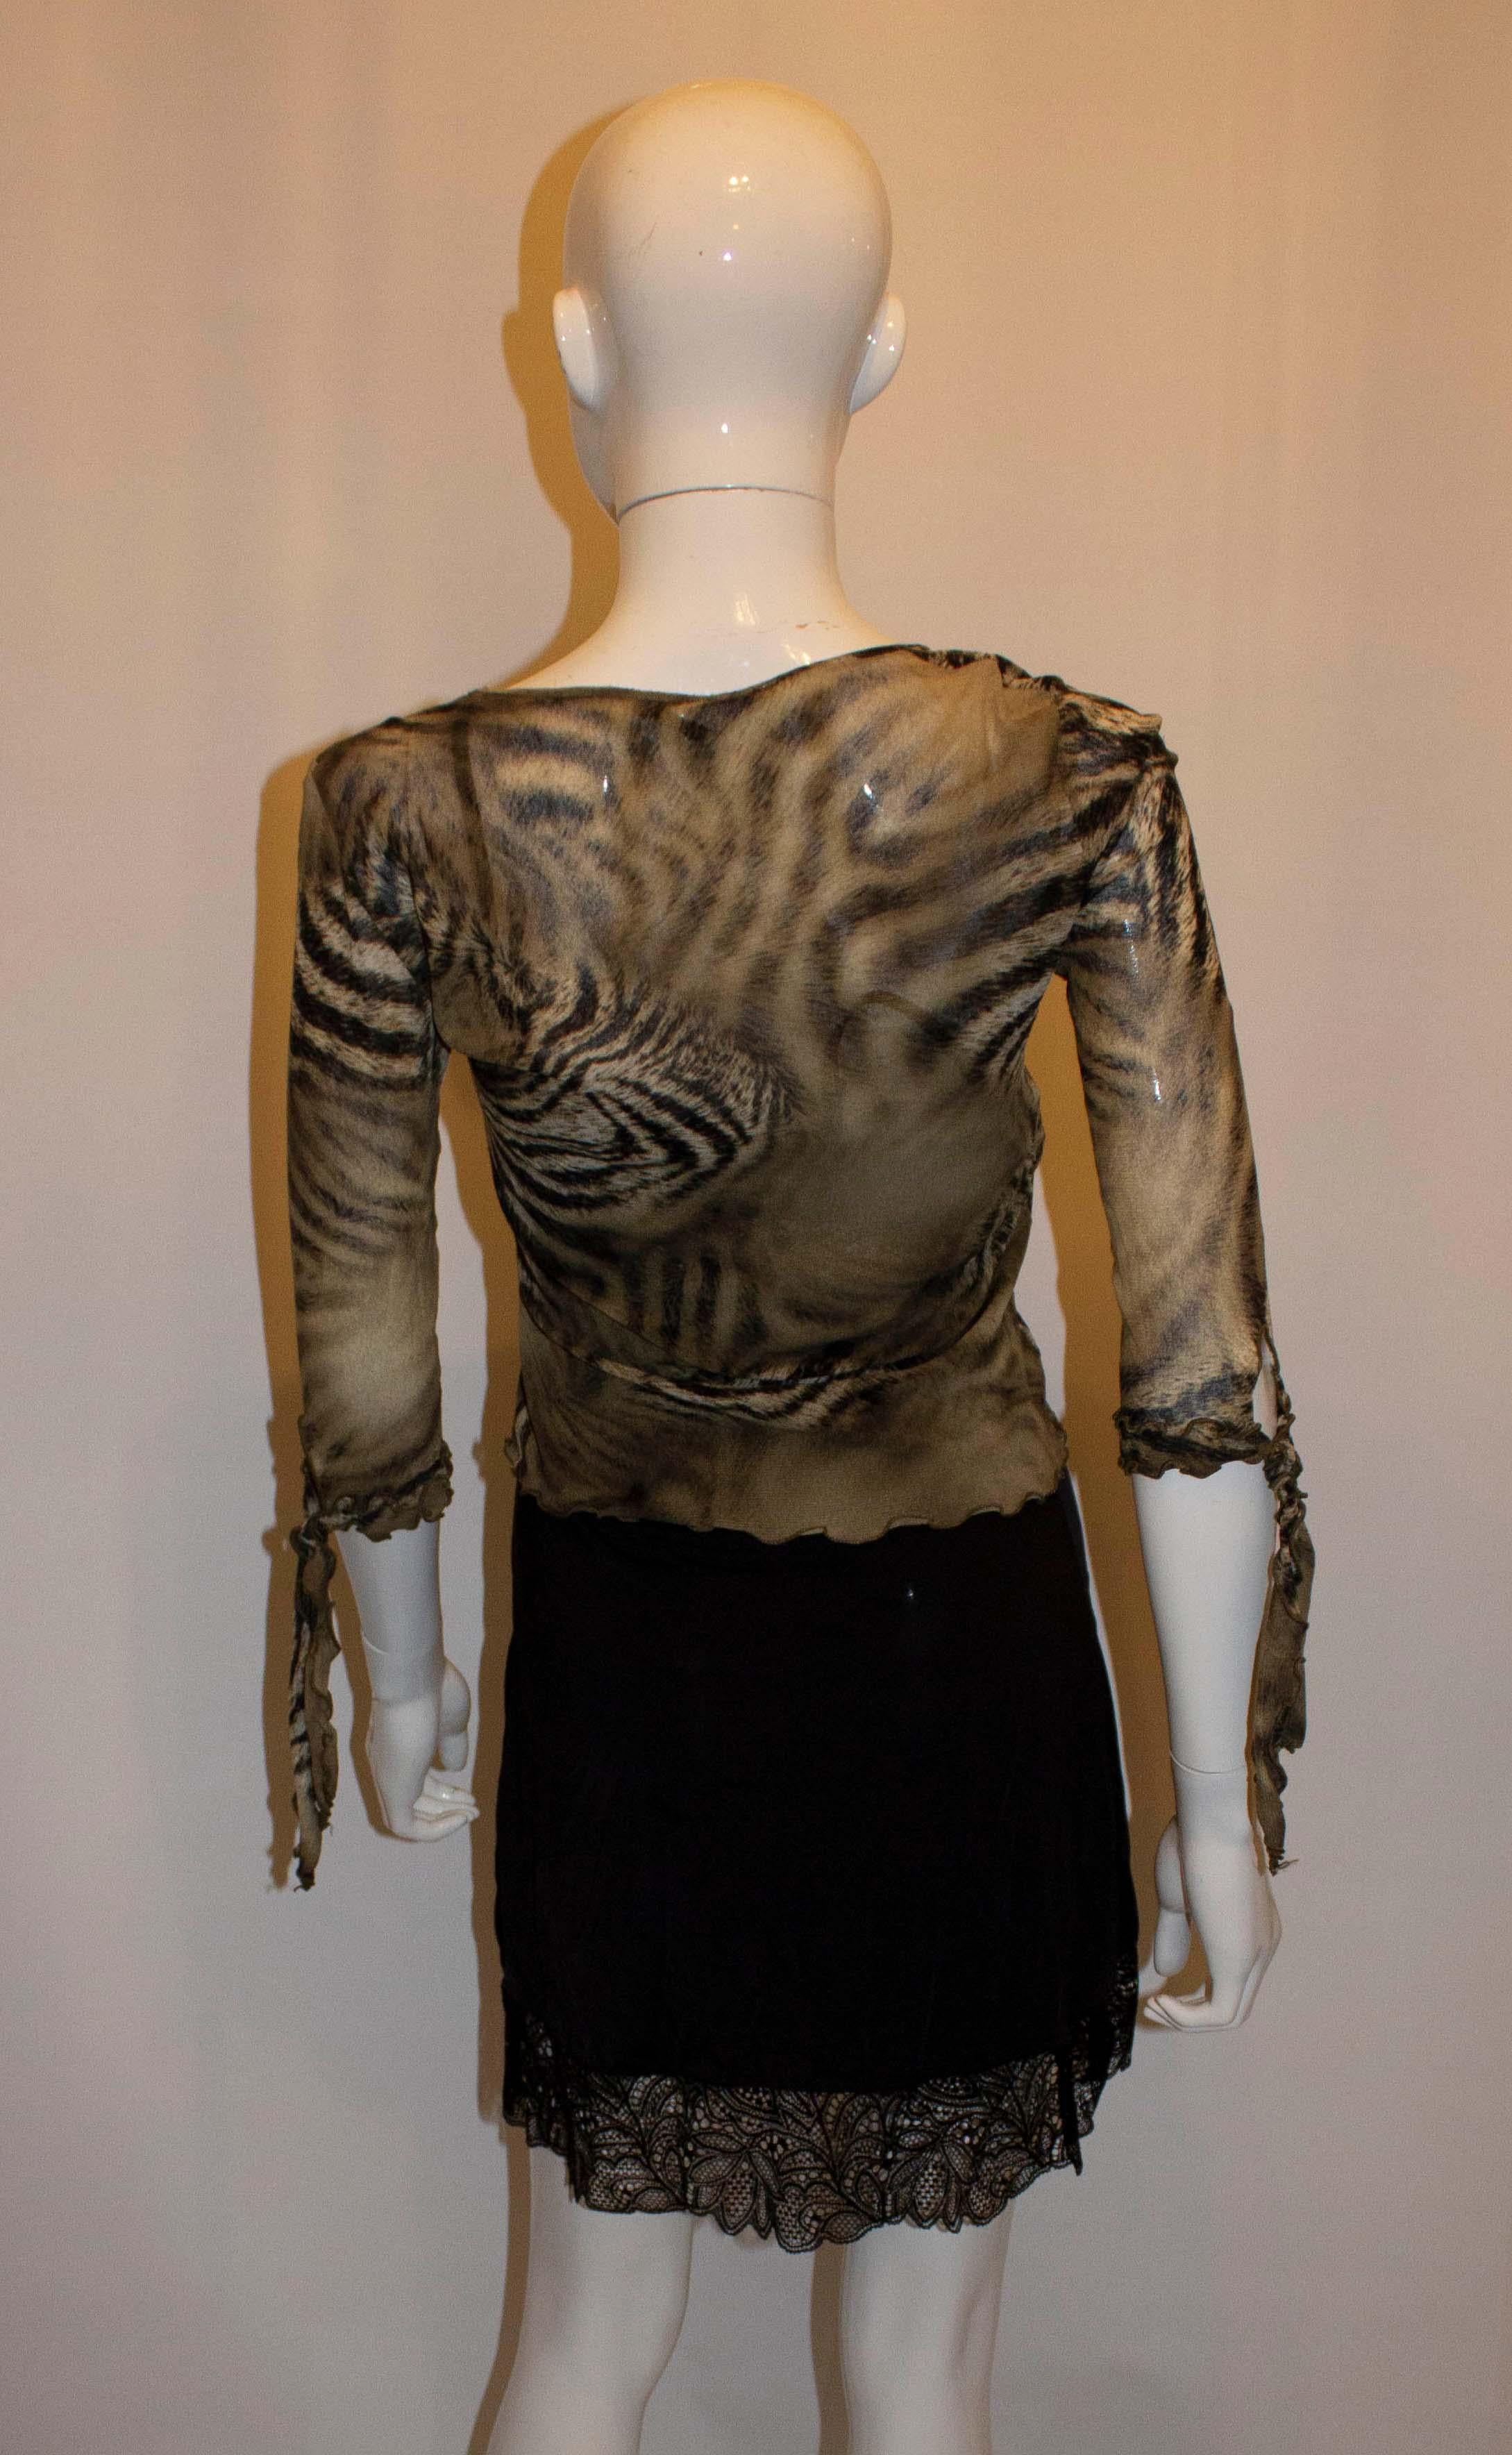 Roberto Cavalli Animal Print Top In Good Condition For Sale In London, GB